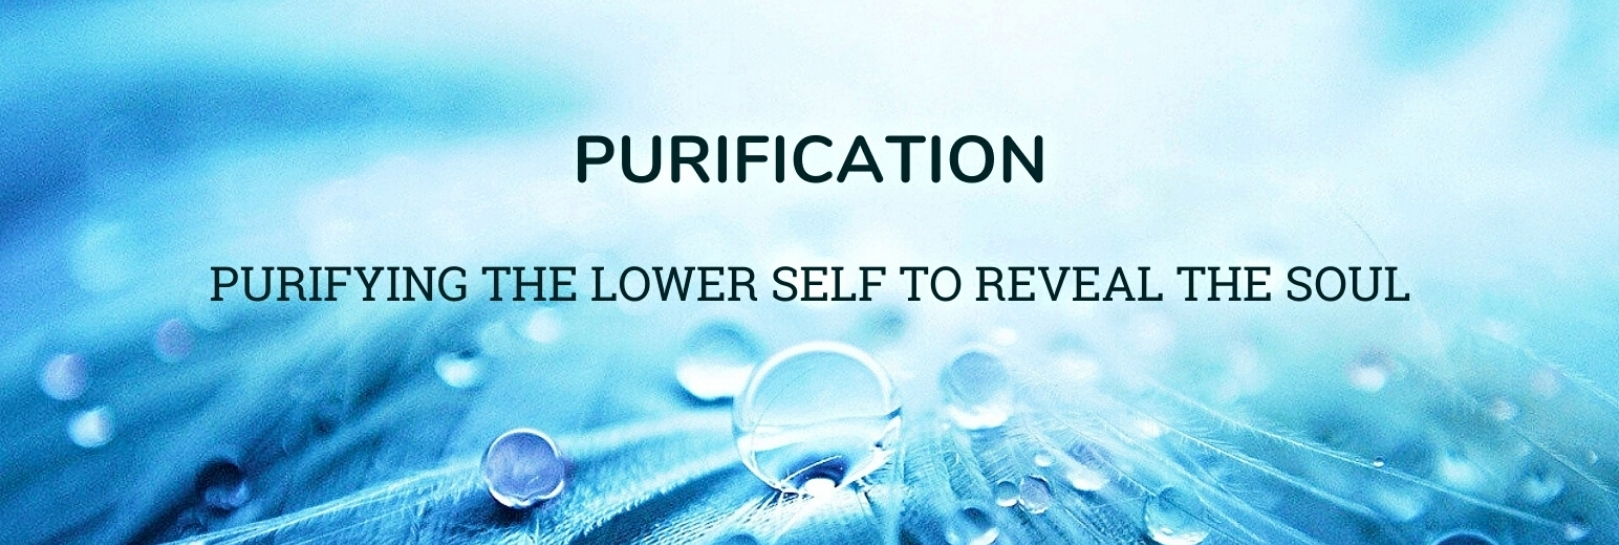 Purification: Purifying the Lower Self to Reveal the Soul